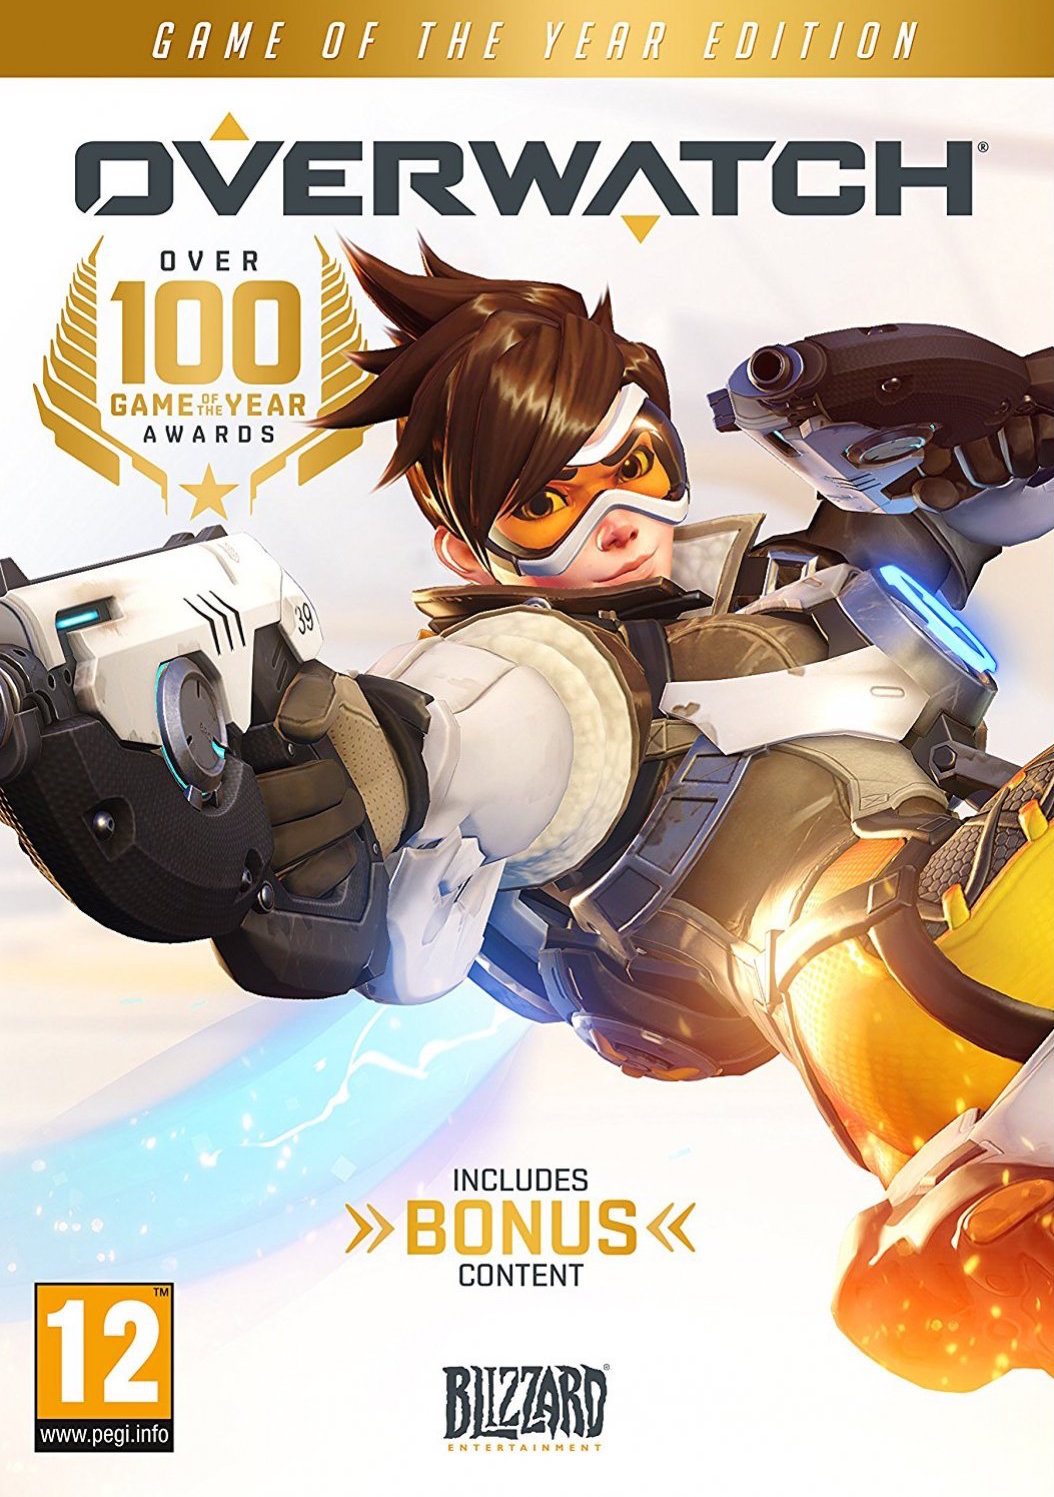 Overwatch Game of the Year Edition (PC), Blizzard